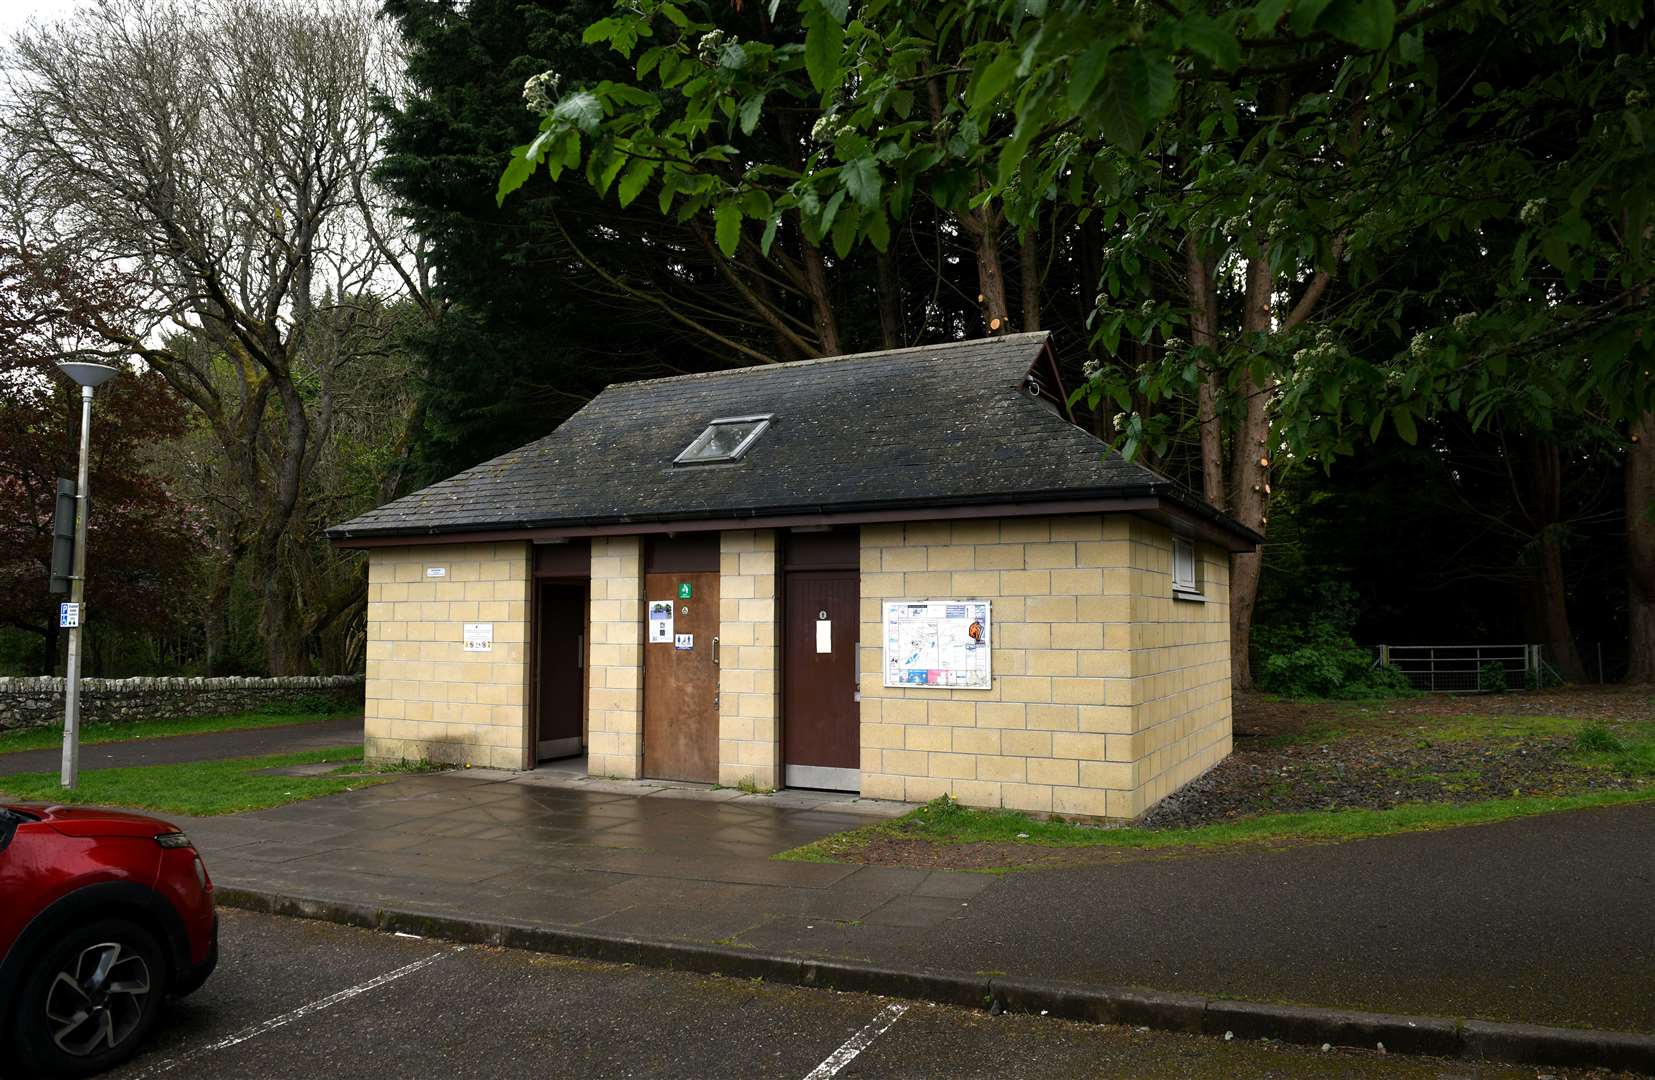 The men's toilets at Whin Park have been closed due to vandalism. Picture: James Mackenzie.